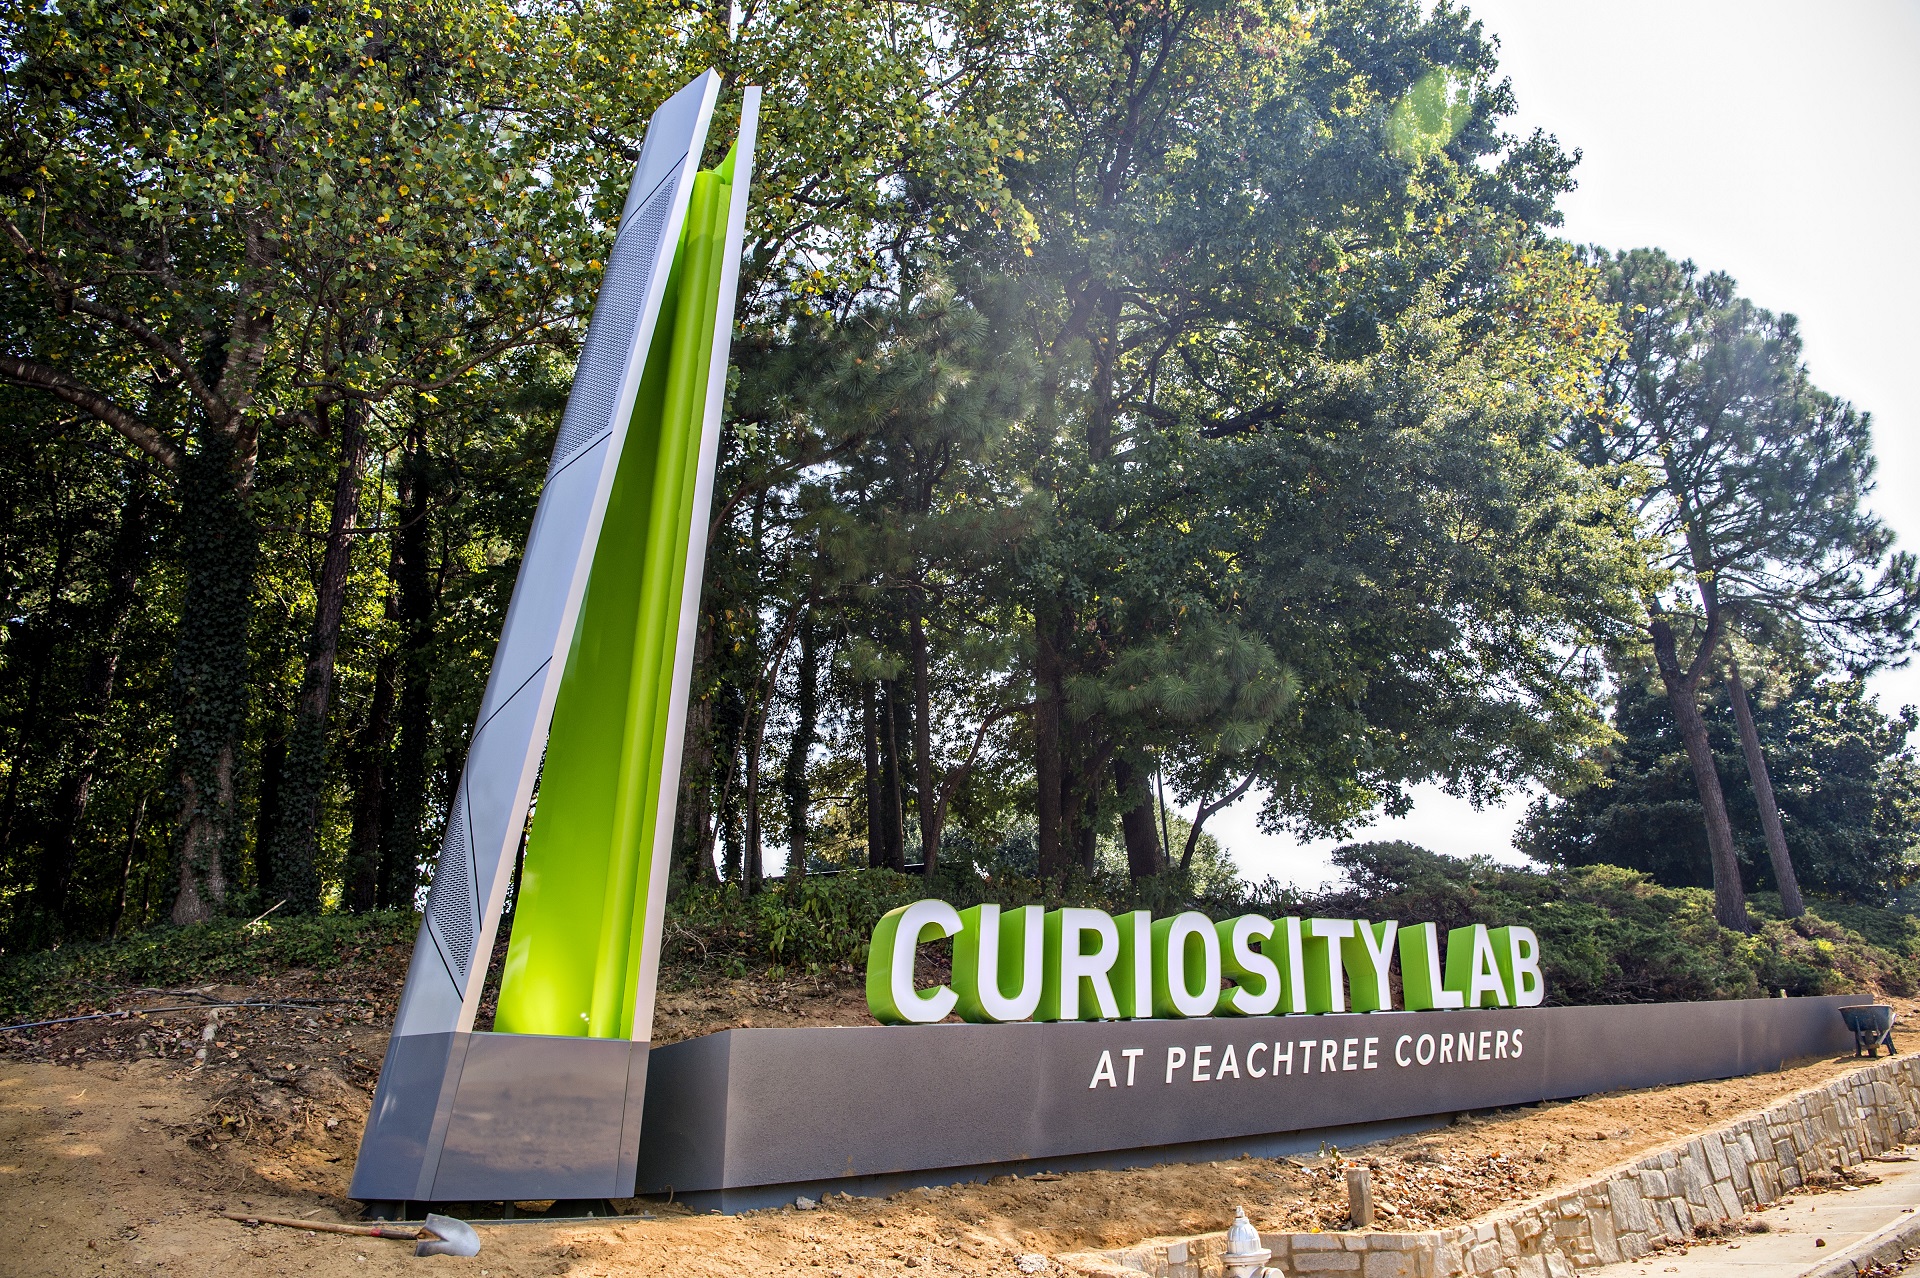 Israel tech start-ups innovation testing scale-up © Curiosity Lab at Peachtree Corners